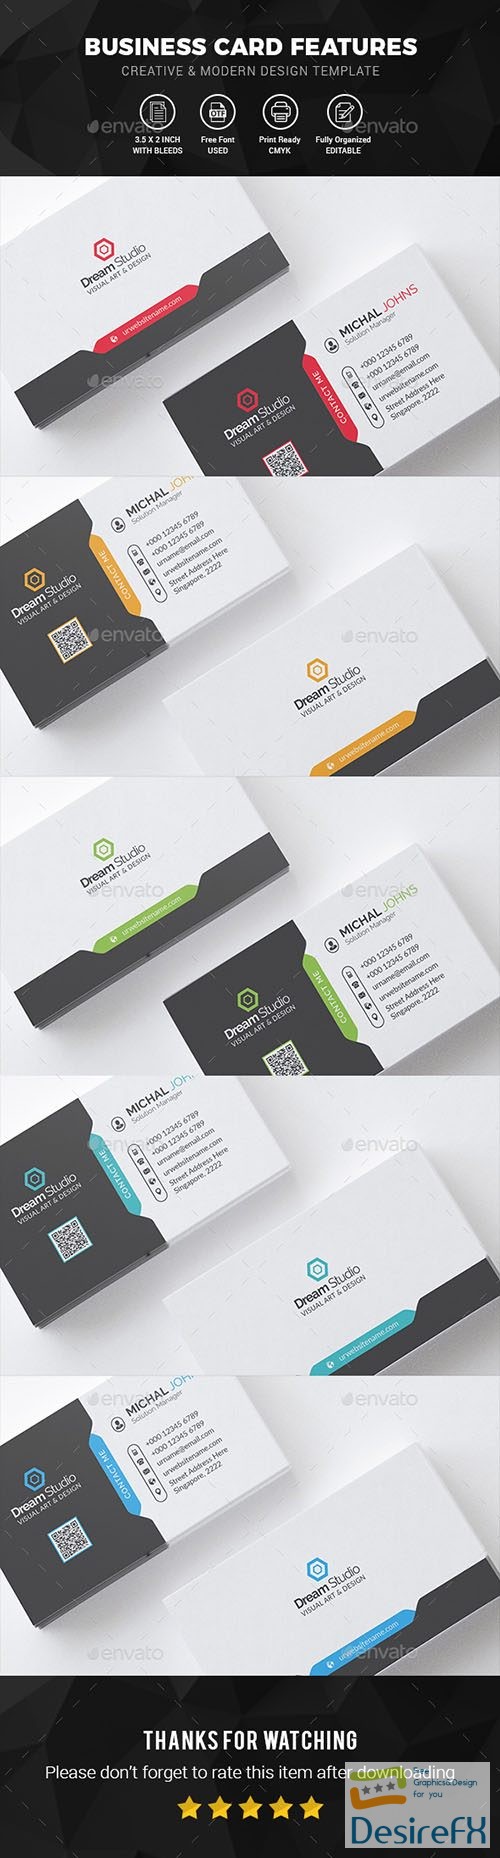 Business Cards 21460680